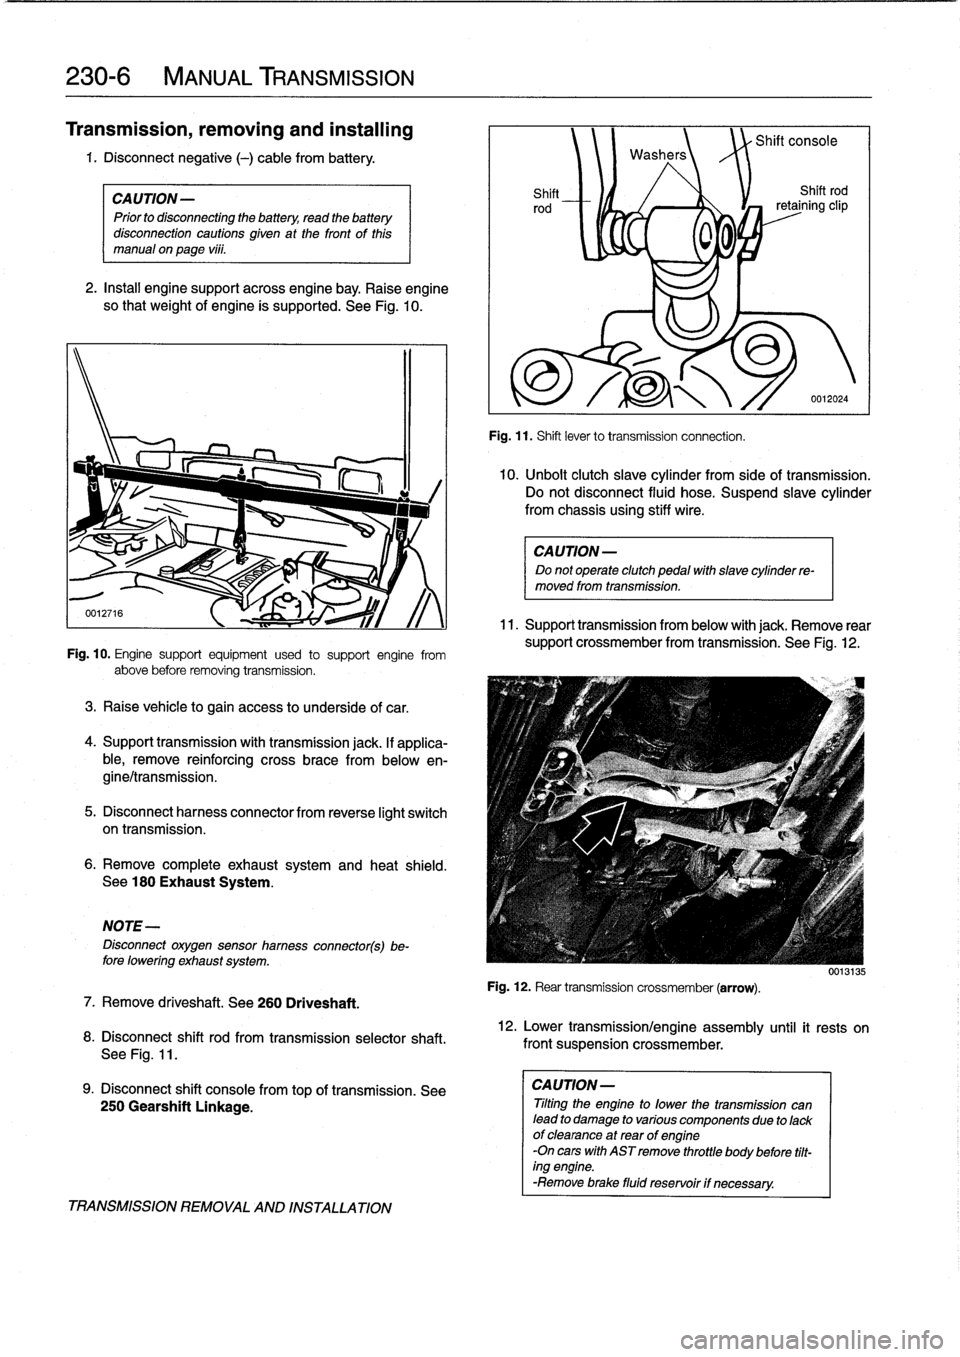 BMW 323i 1996 E36 Workshop Manual 
230-
6

	

MANUAL
TRANSMISSION

Transmission,
removing
and
installing

1
.
Disconnect
negative
(-)
cable
from
battery
.

CAUTION-

Prior
to
disconnecting
the
battery,
read
the
battery
disconnection
c